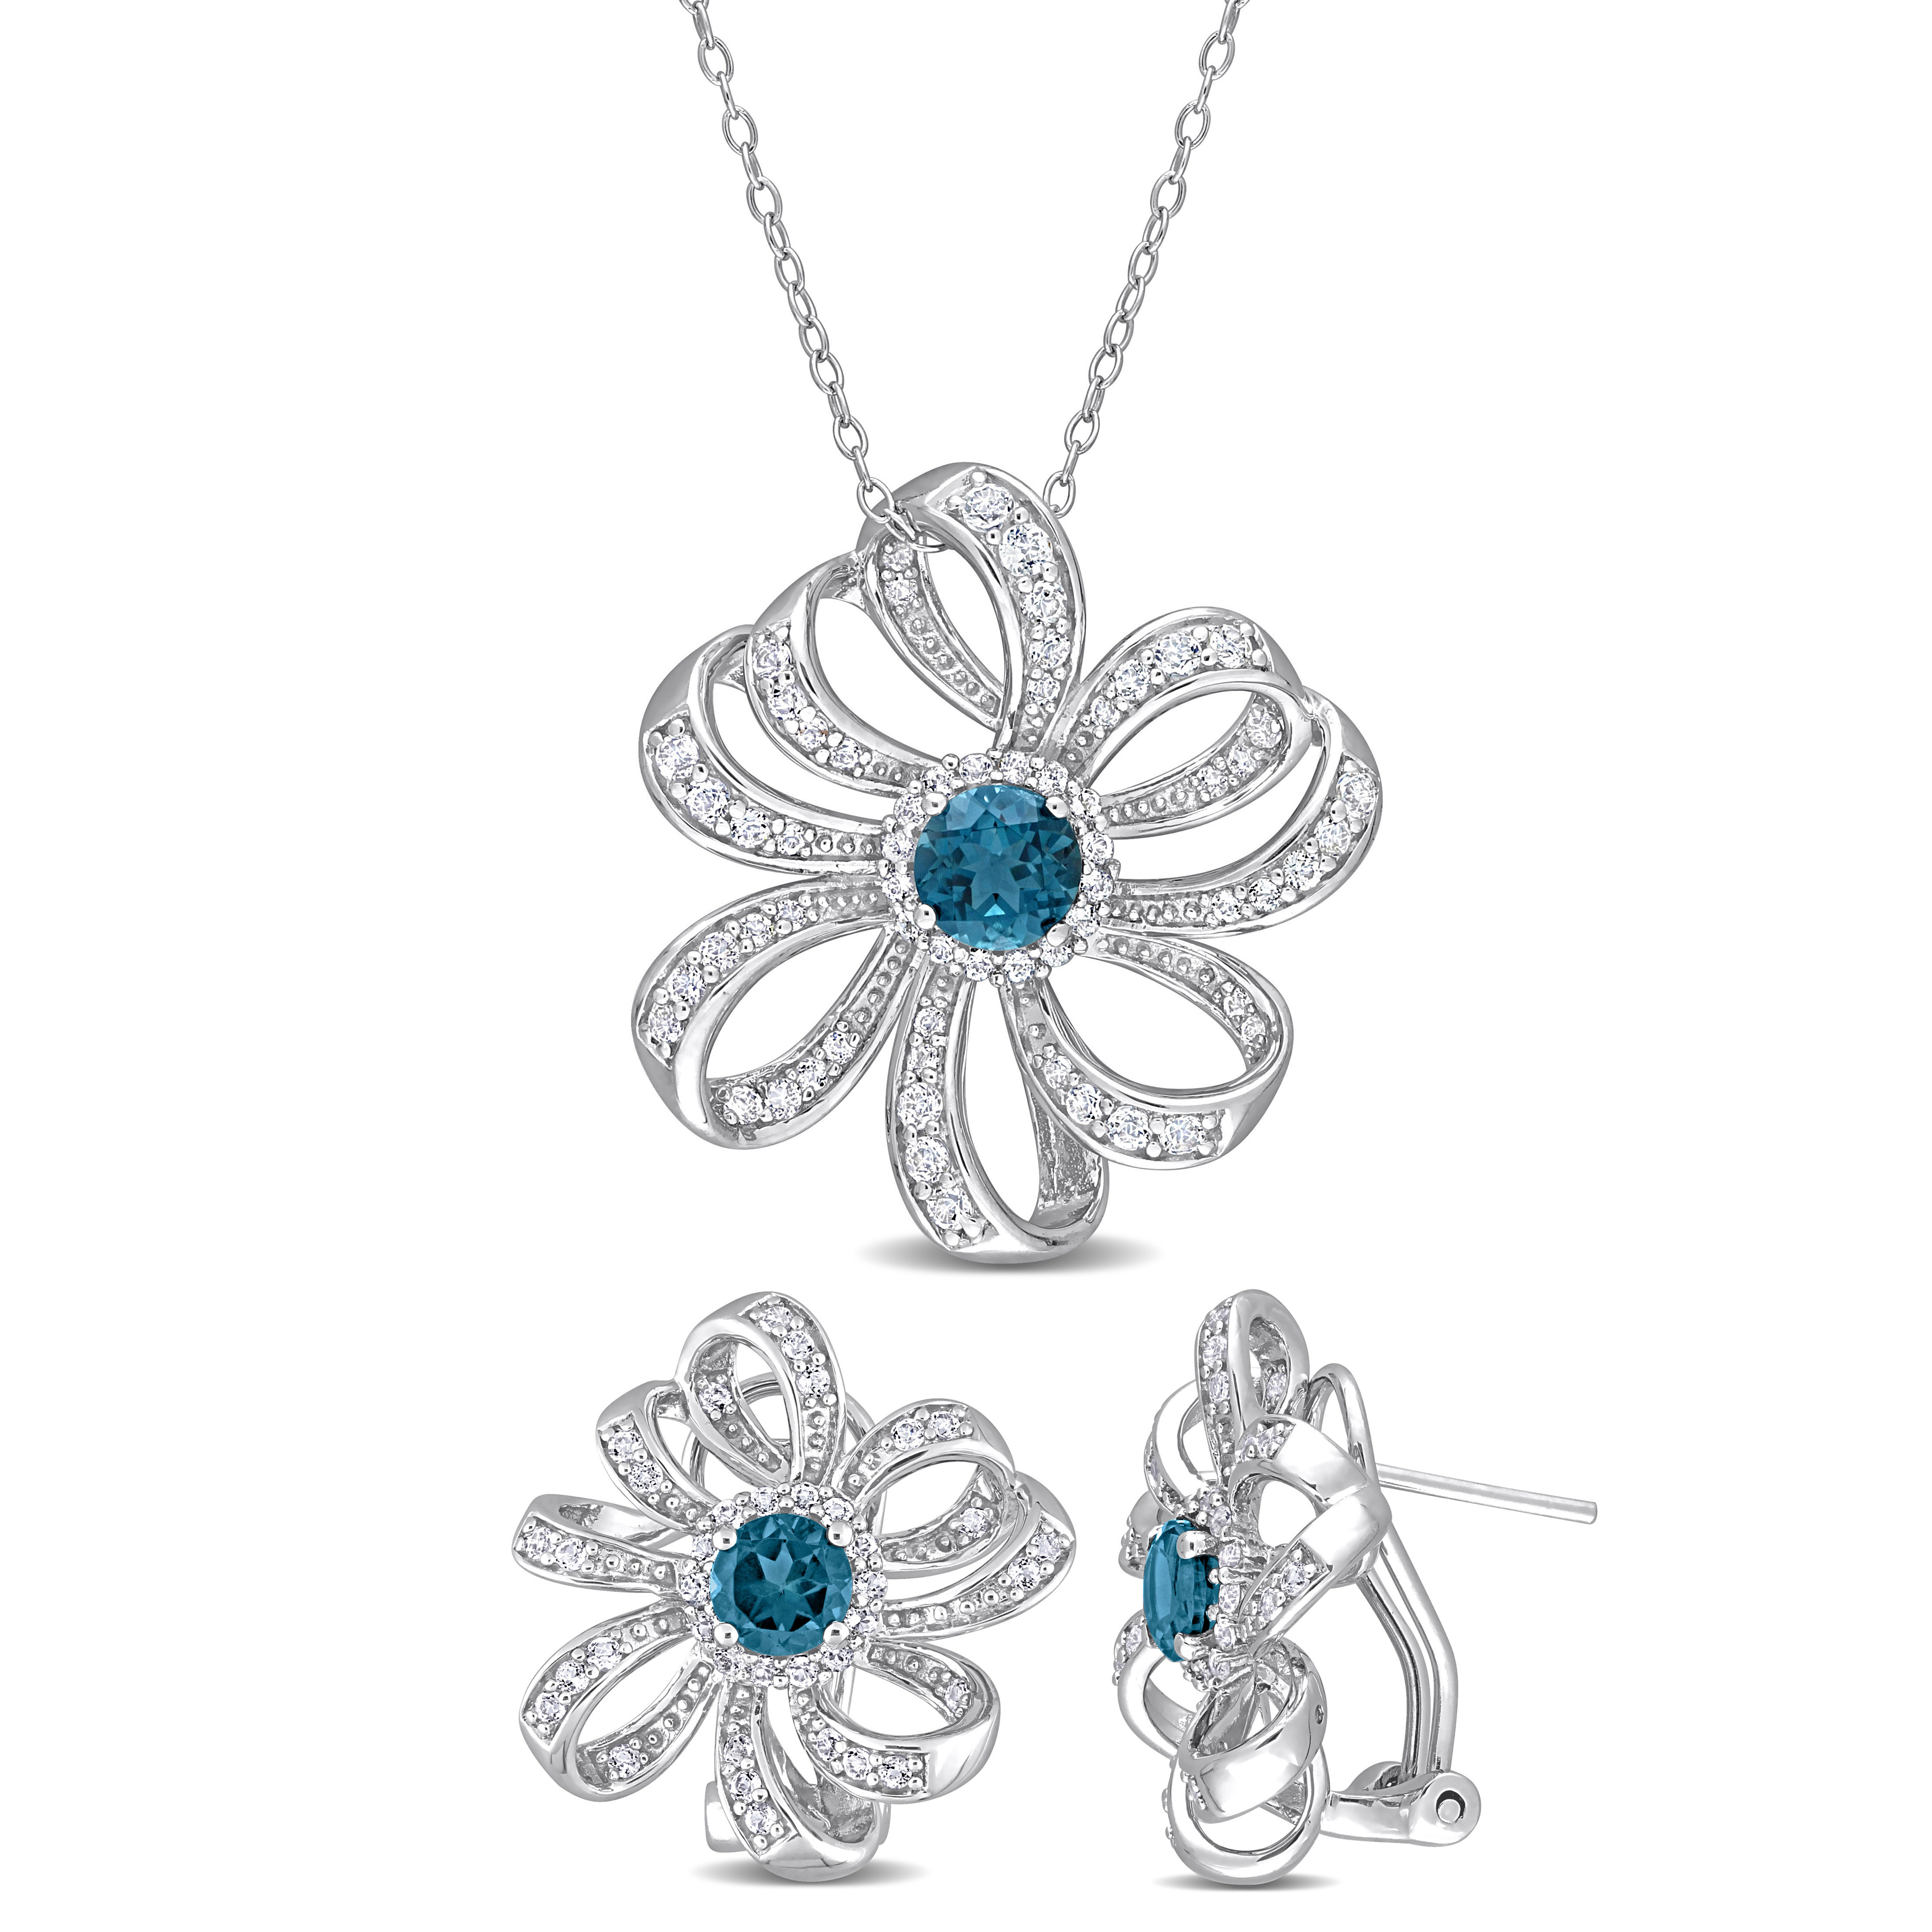 4 1/5 CT TGW London-Blue and White Topaz 2-Piece Floral Necklace and Earrings Set in Sterling Silver